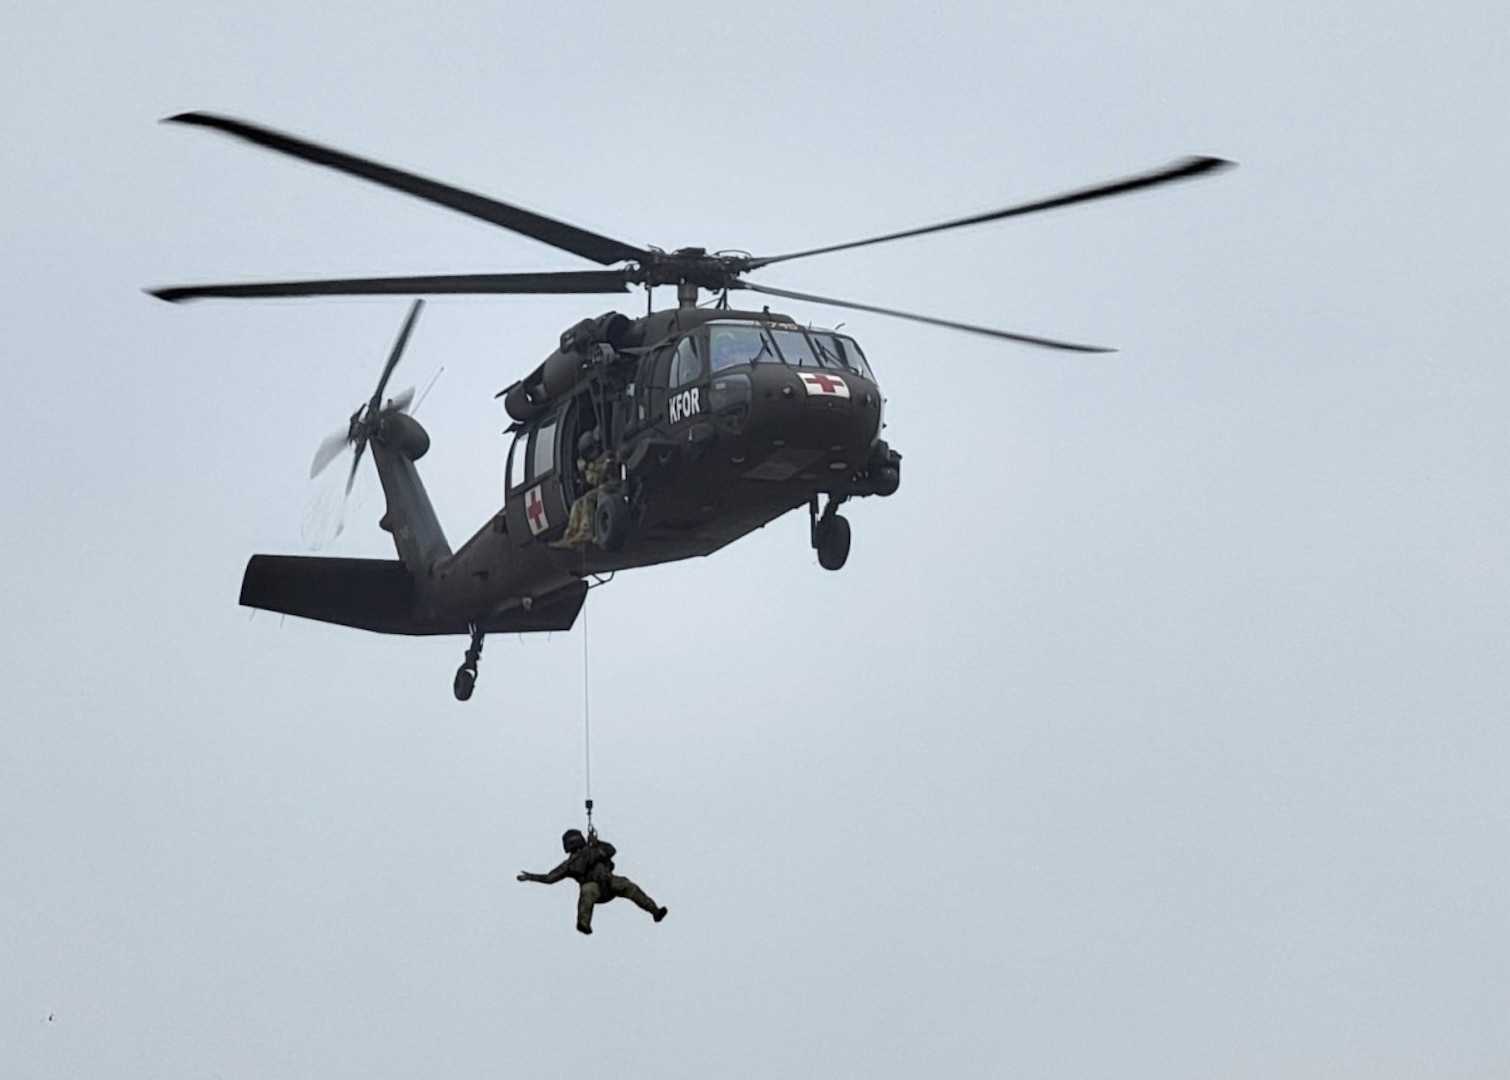 Virginia Army National Guard Soldiers with Detachment 2, Charlie Company, 1st Battalion, 169th Aviation Regiment, conduct high-performance rescue hoist training at Camp Bondsteel, Kosovo, March 28, 2022. Hoist operations are one of many capabilities the Black Hawk helicopter brings to the Kosovo Force mission.